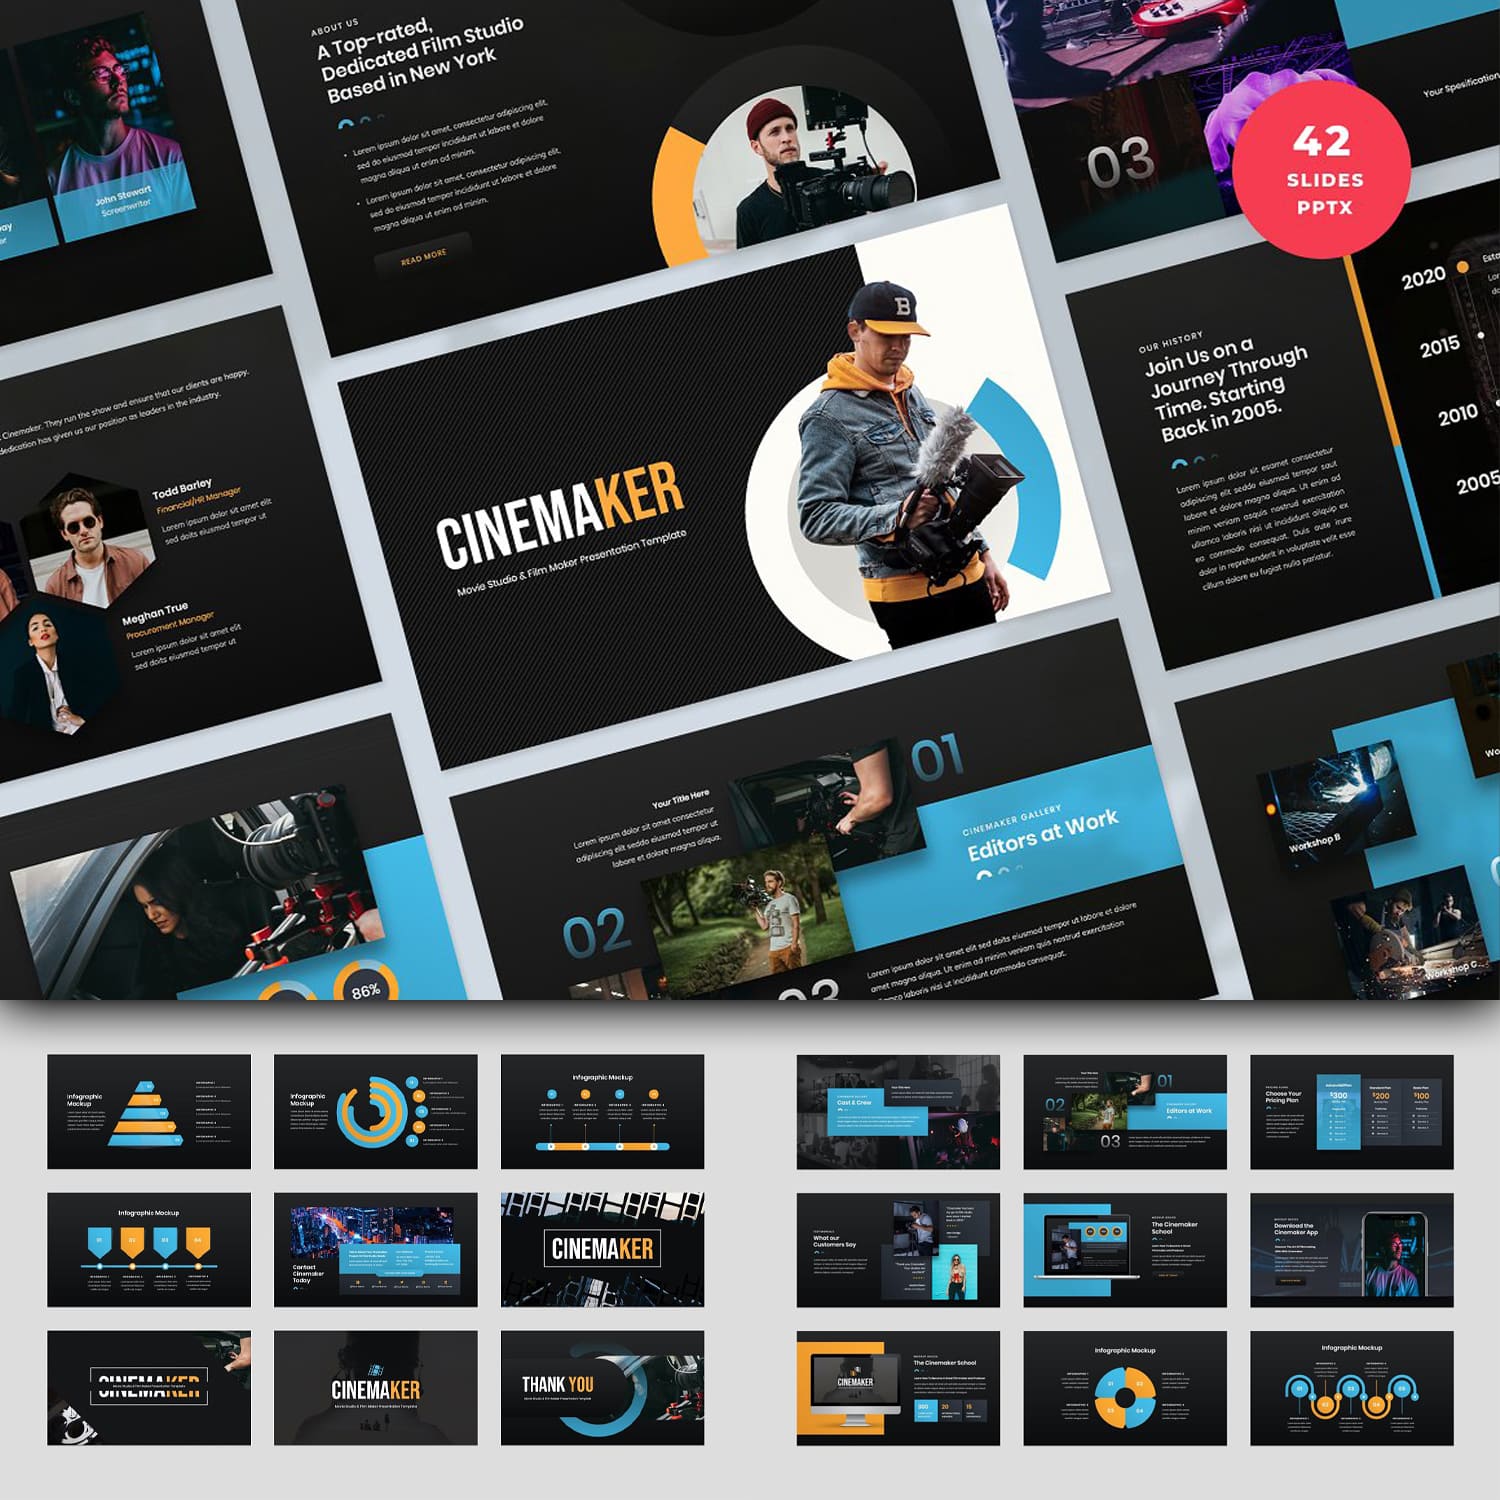 Movie Studio PowerPoint Template cover.